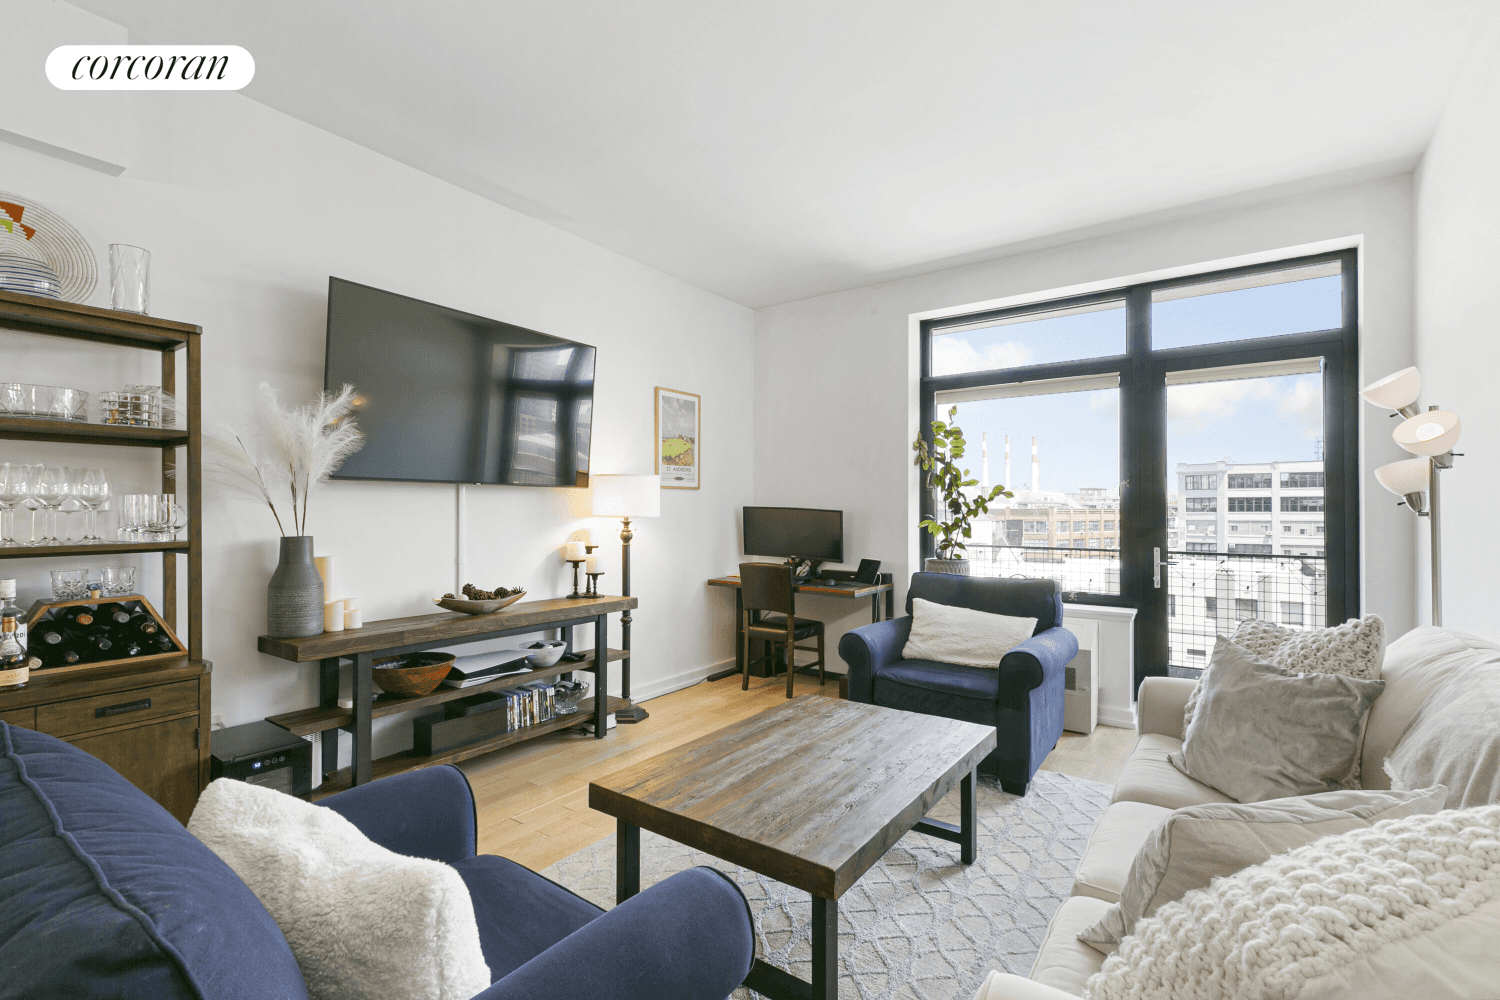 BRIGHT 723 SQ. FT. RESIDENCE WITH PRIVATE OUTDOOR SPACE AND OPEN CITY VIEWSFeaturing a large balcony, high ceilings, oversized windows framing skyline views of Long Island City and Manhattan, in ...